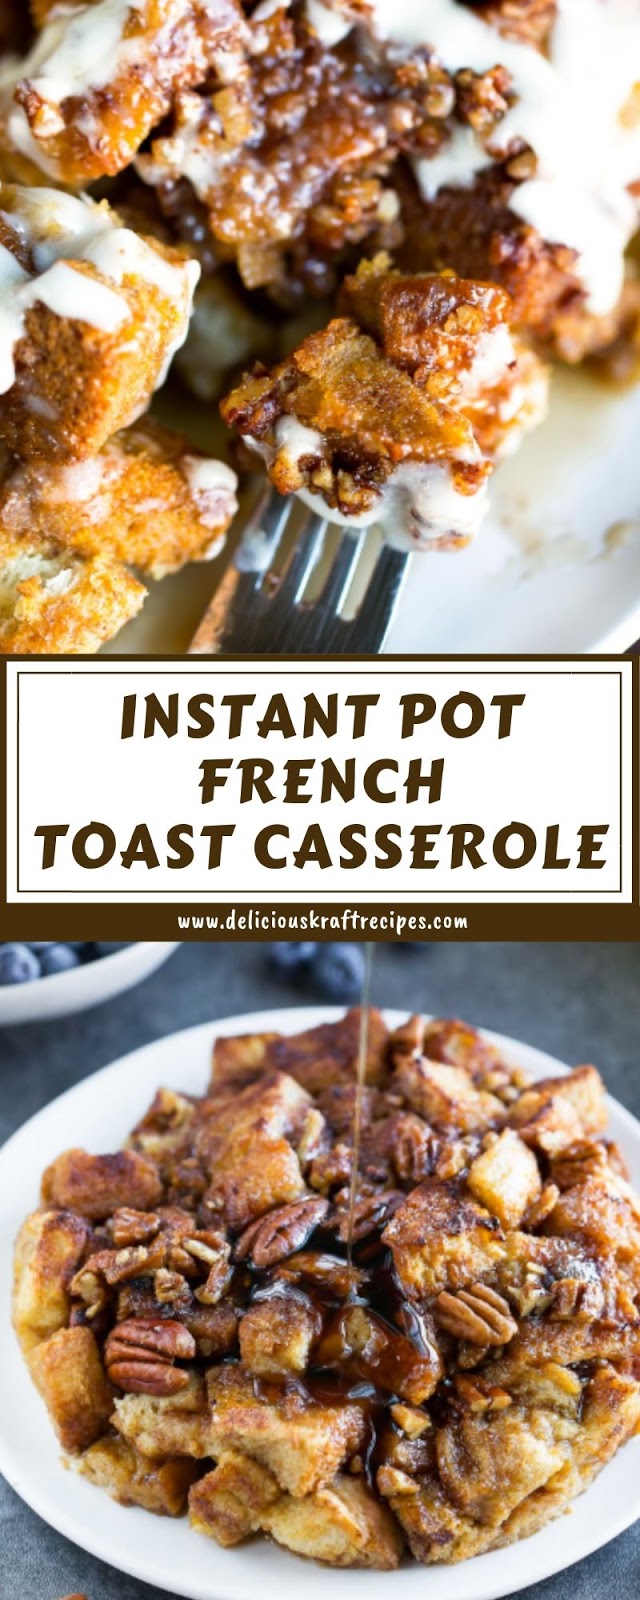 INSTANT POT FRENCH TOAST CASSEROLE